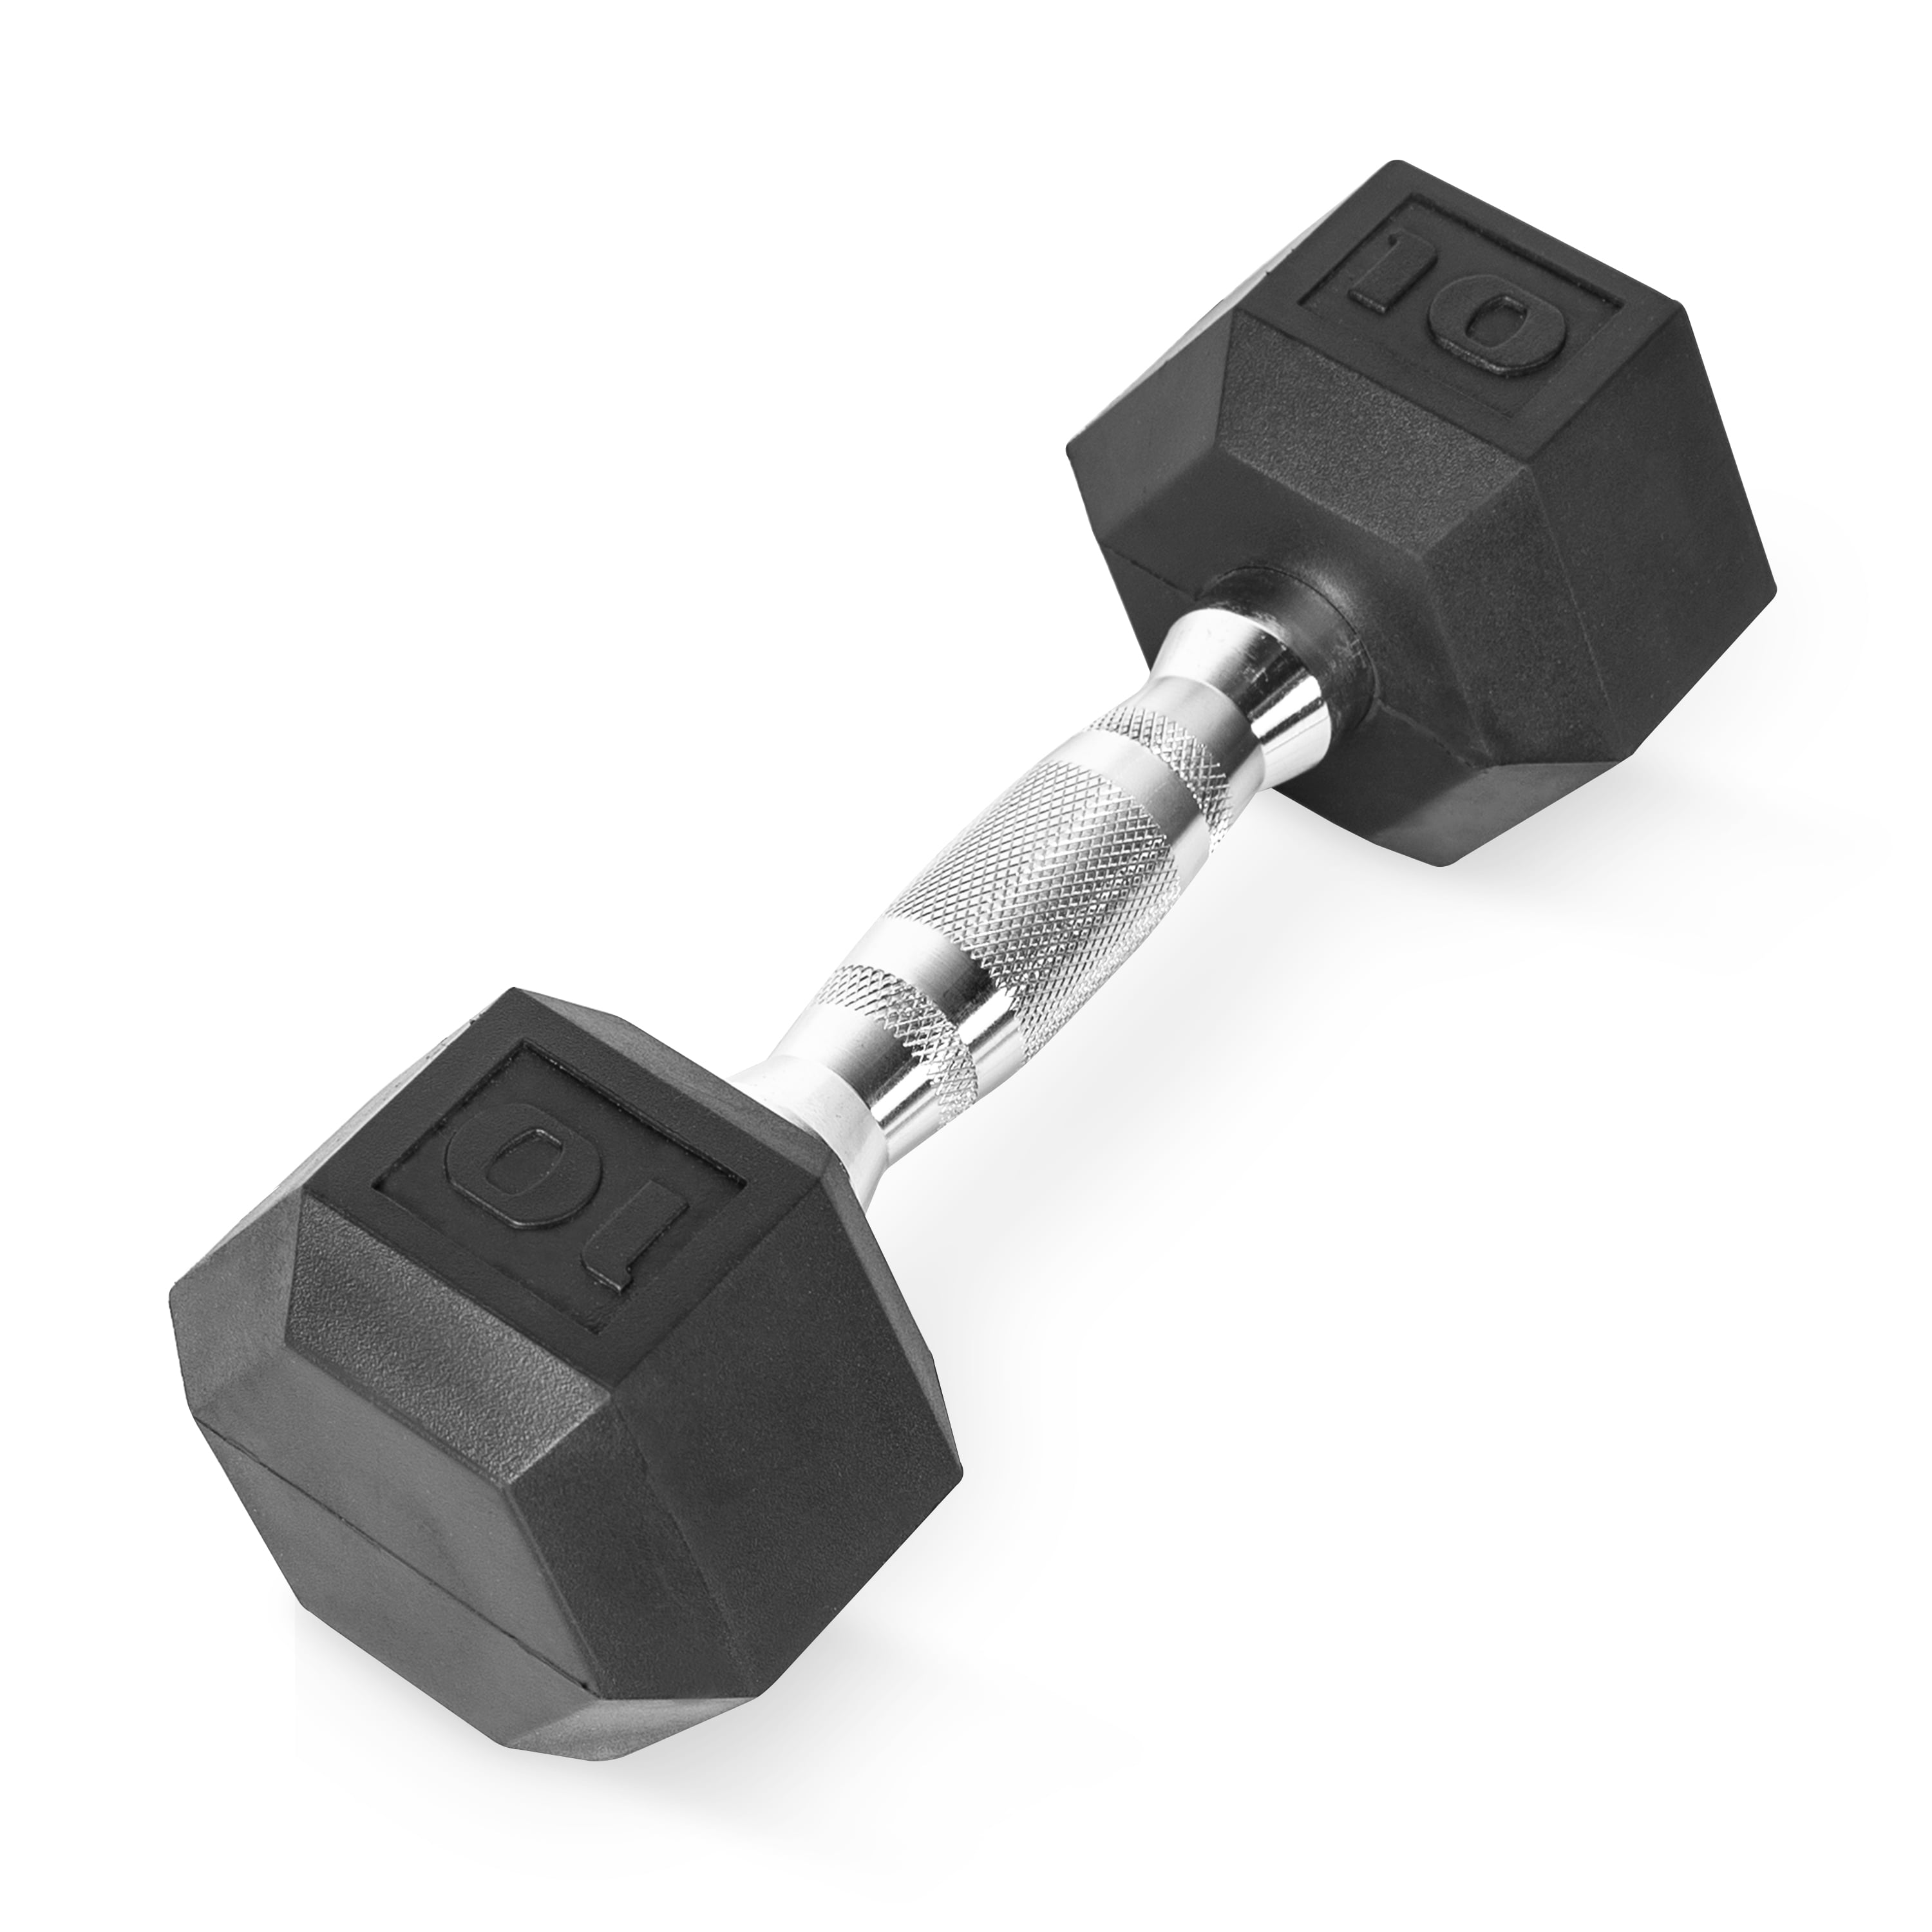 Rubber Encased Hexagonal Cast Iron Dumbbell Weights MOTION Hex Dumbbells Knurled Chrome Handle Heavy Duty Rubber Commercial Dumbbell Weight Sets for Weight Training